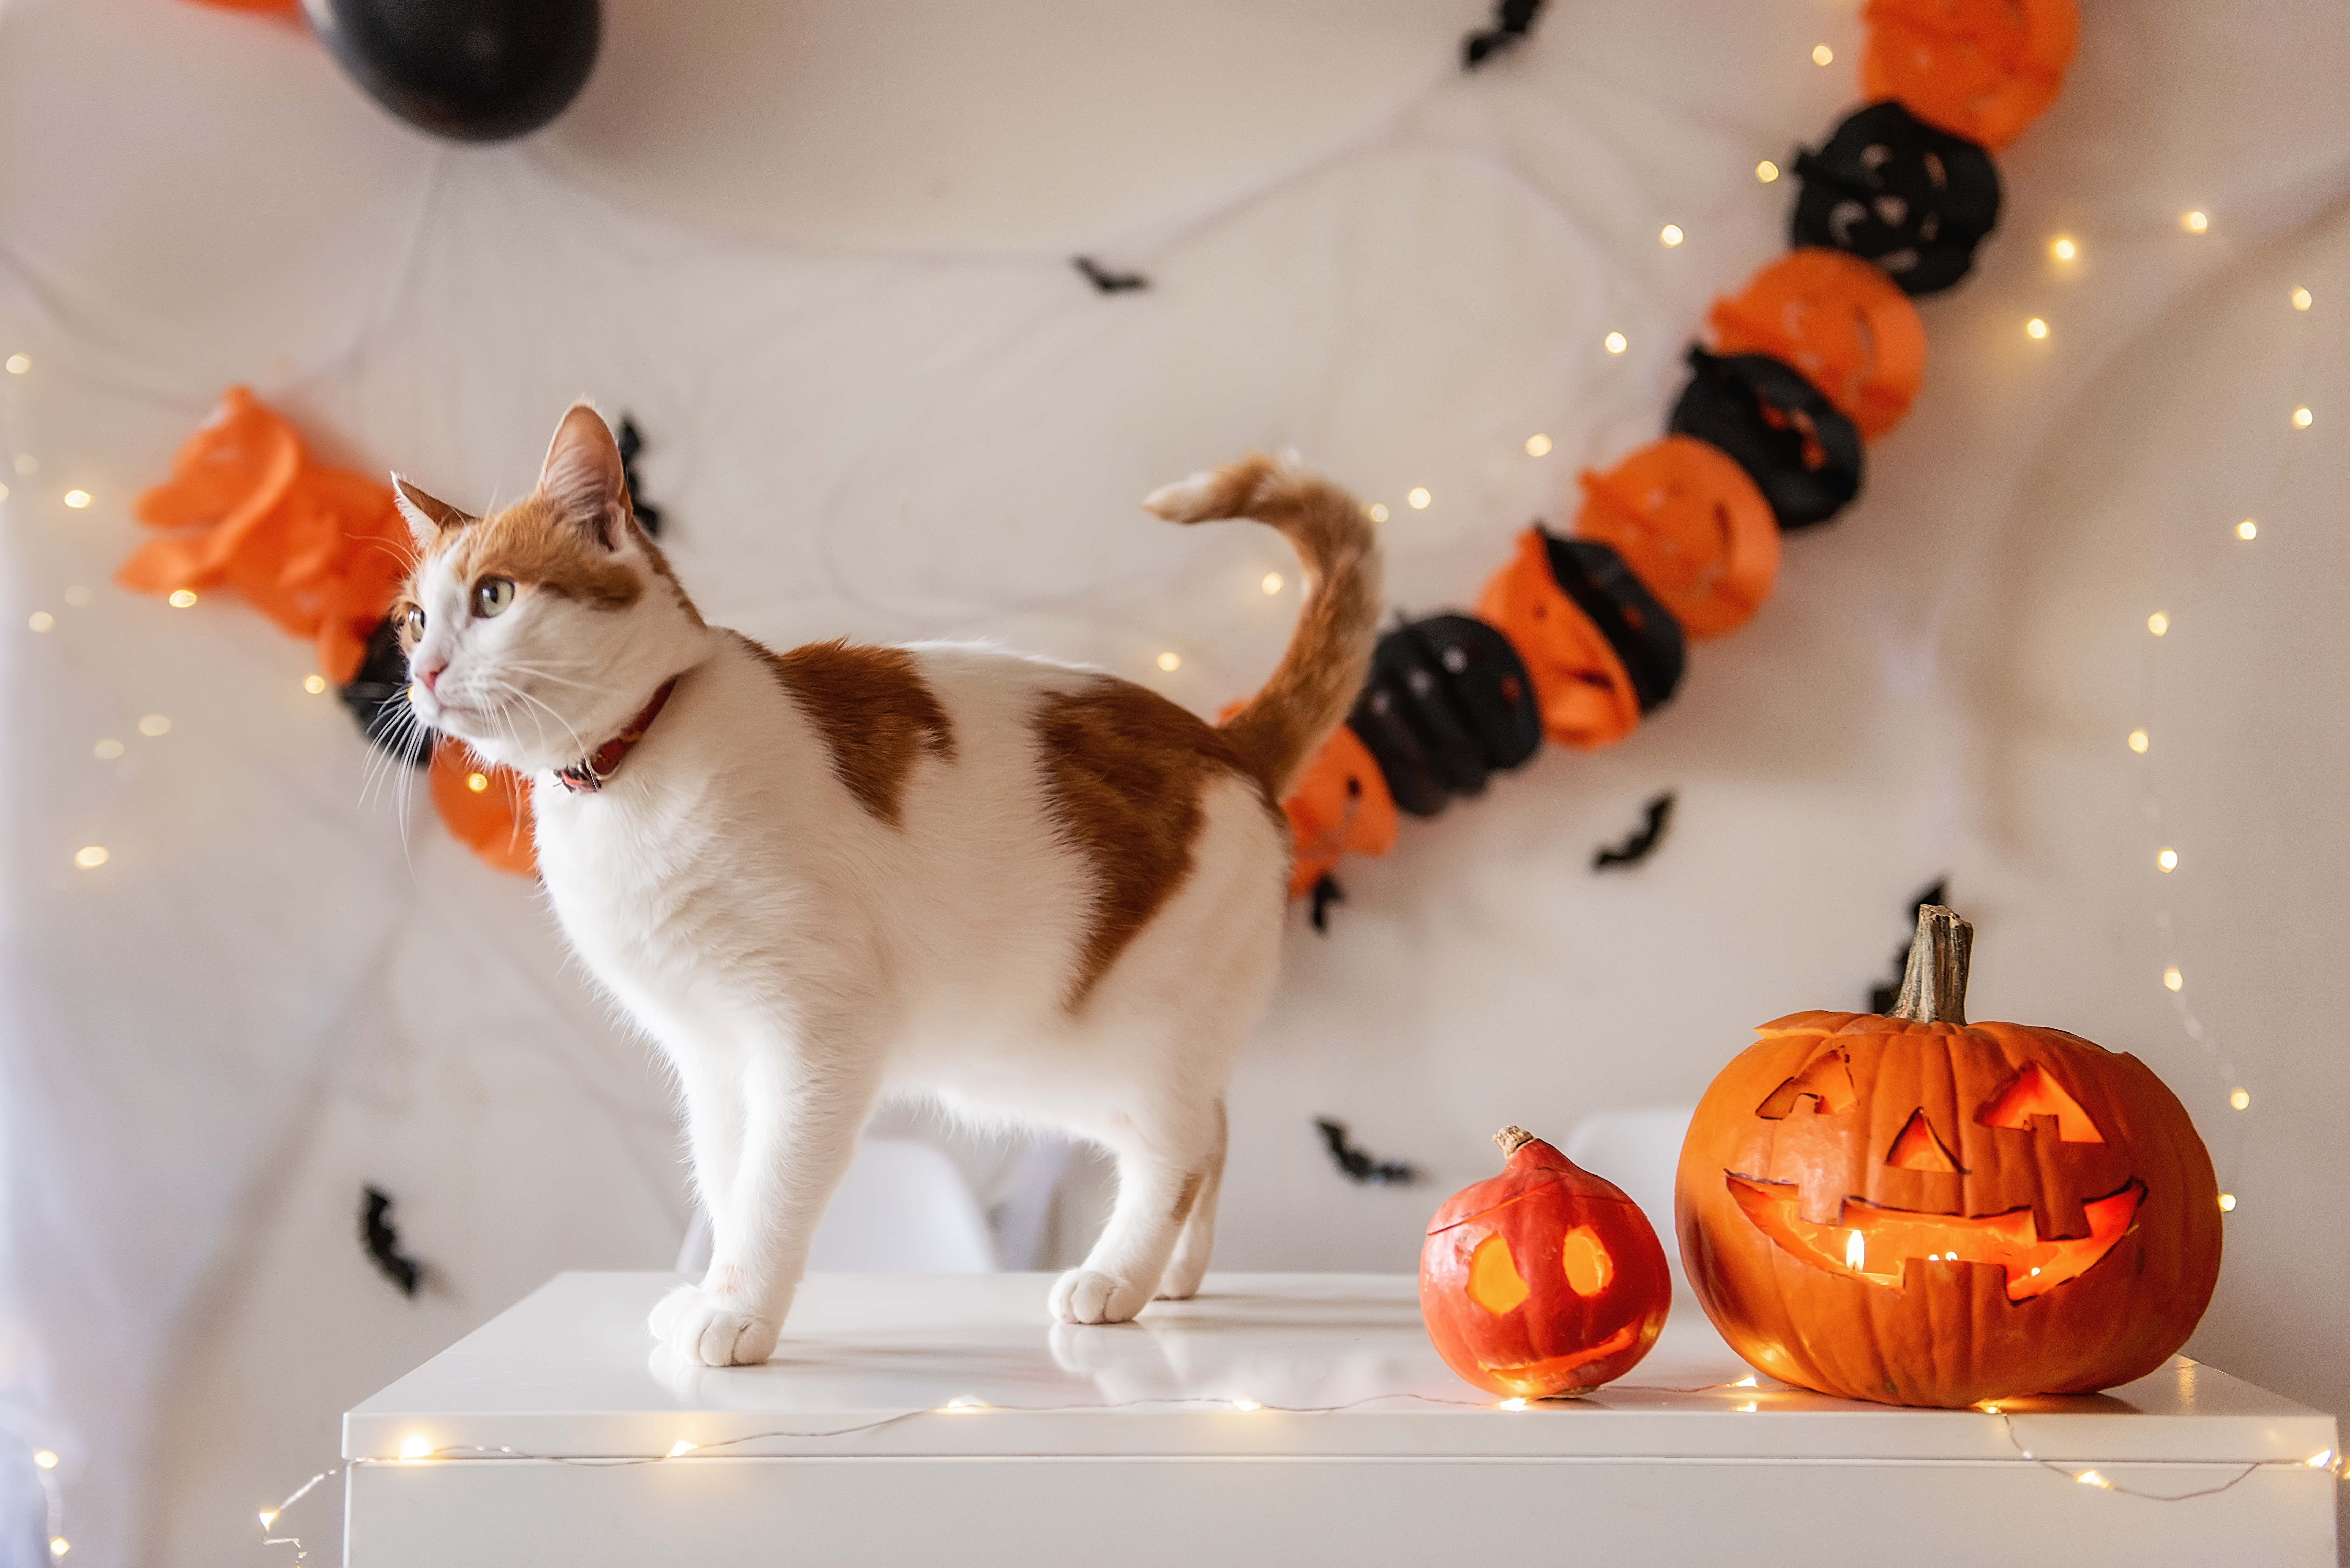 White ginger cat stands on table next to pumpkin lanterns against the backdrop of Halloween decorations. On isolated background hanging orange black garland in spider web with bats. Pet party at home